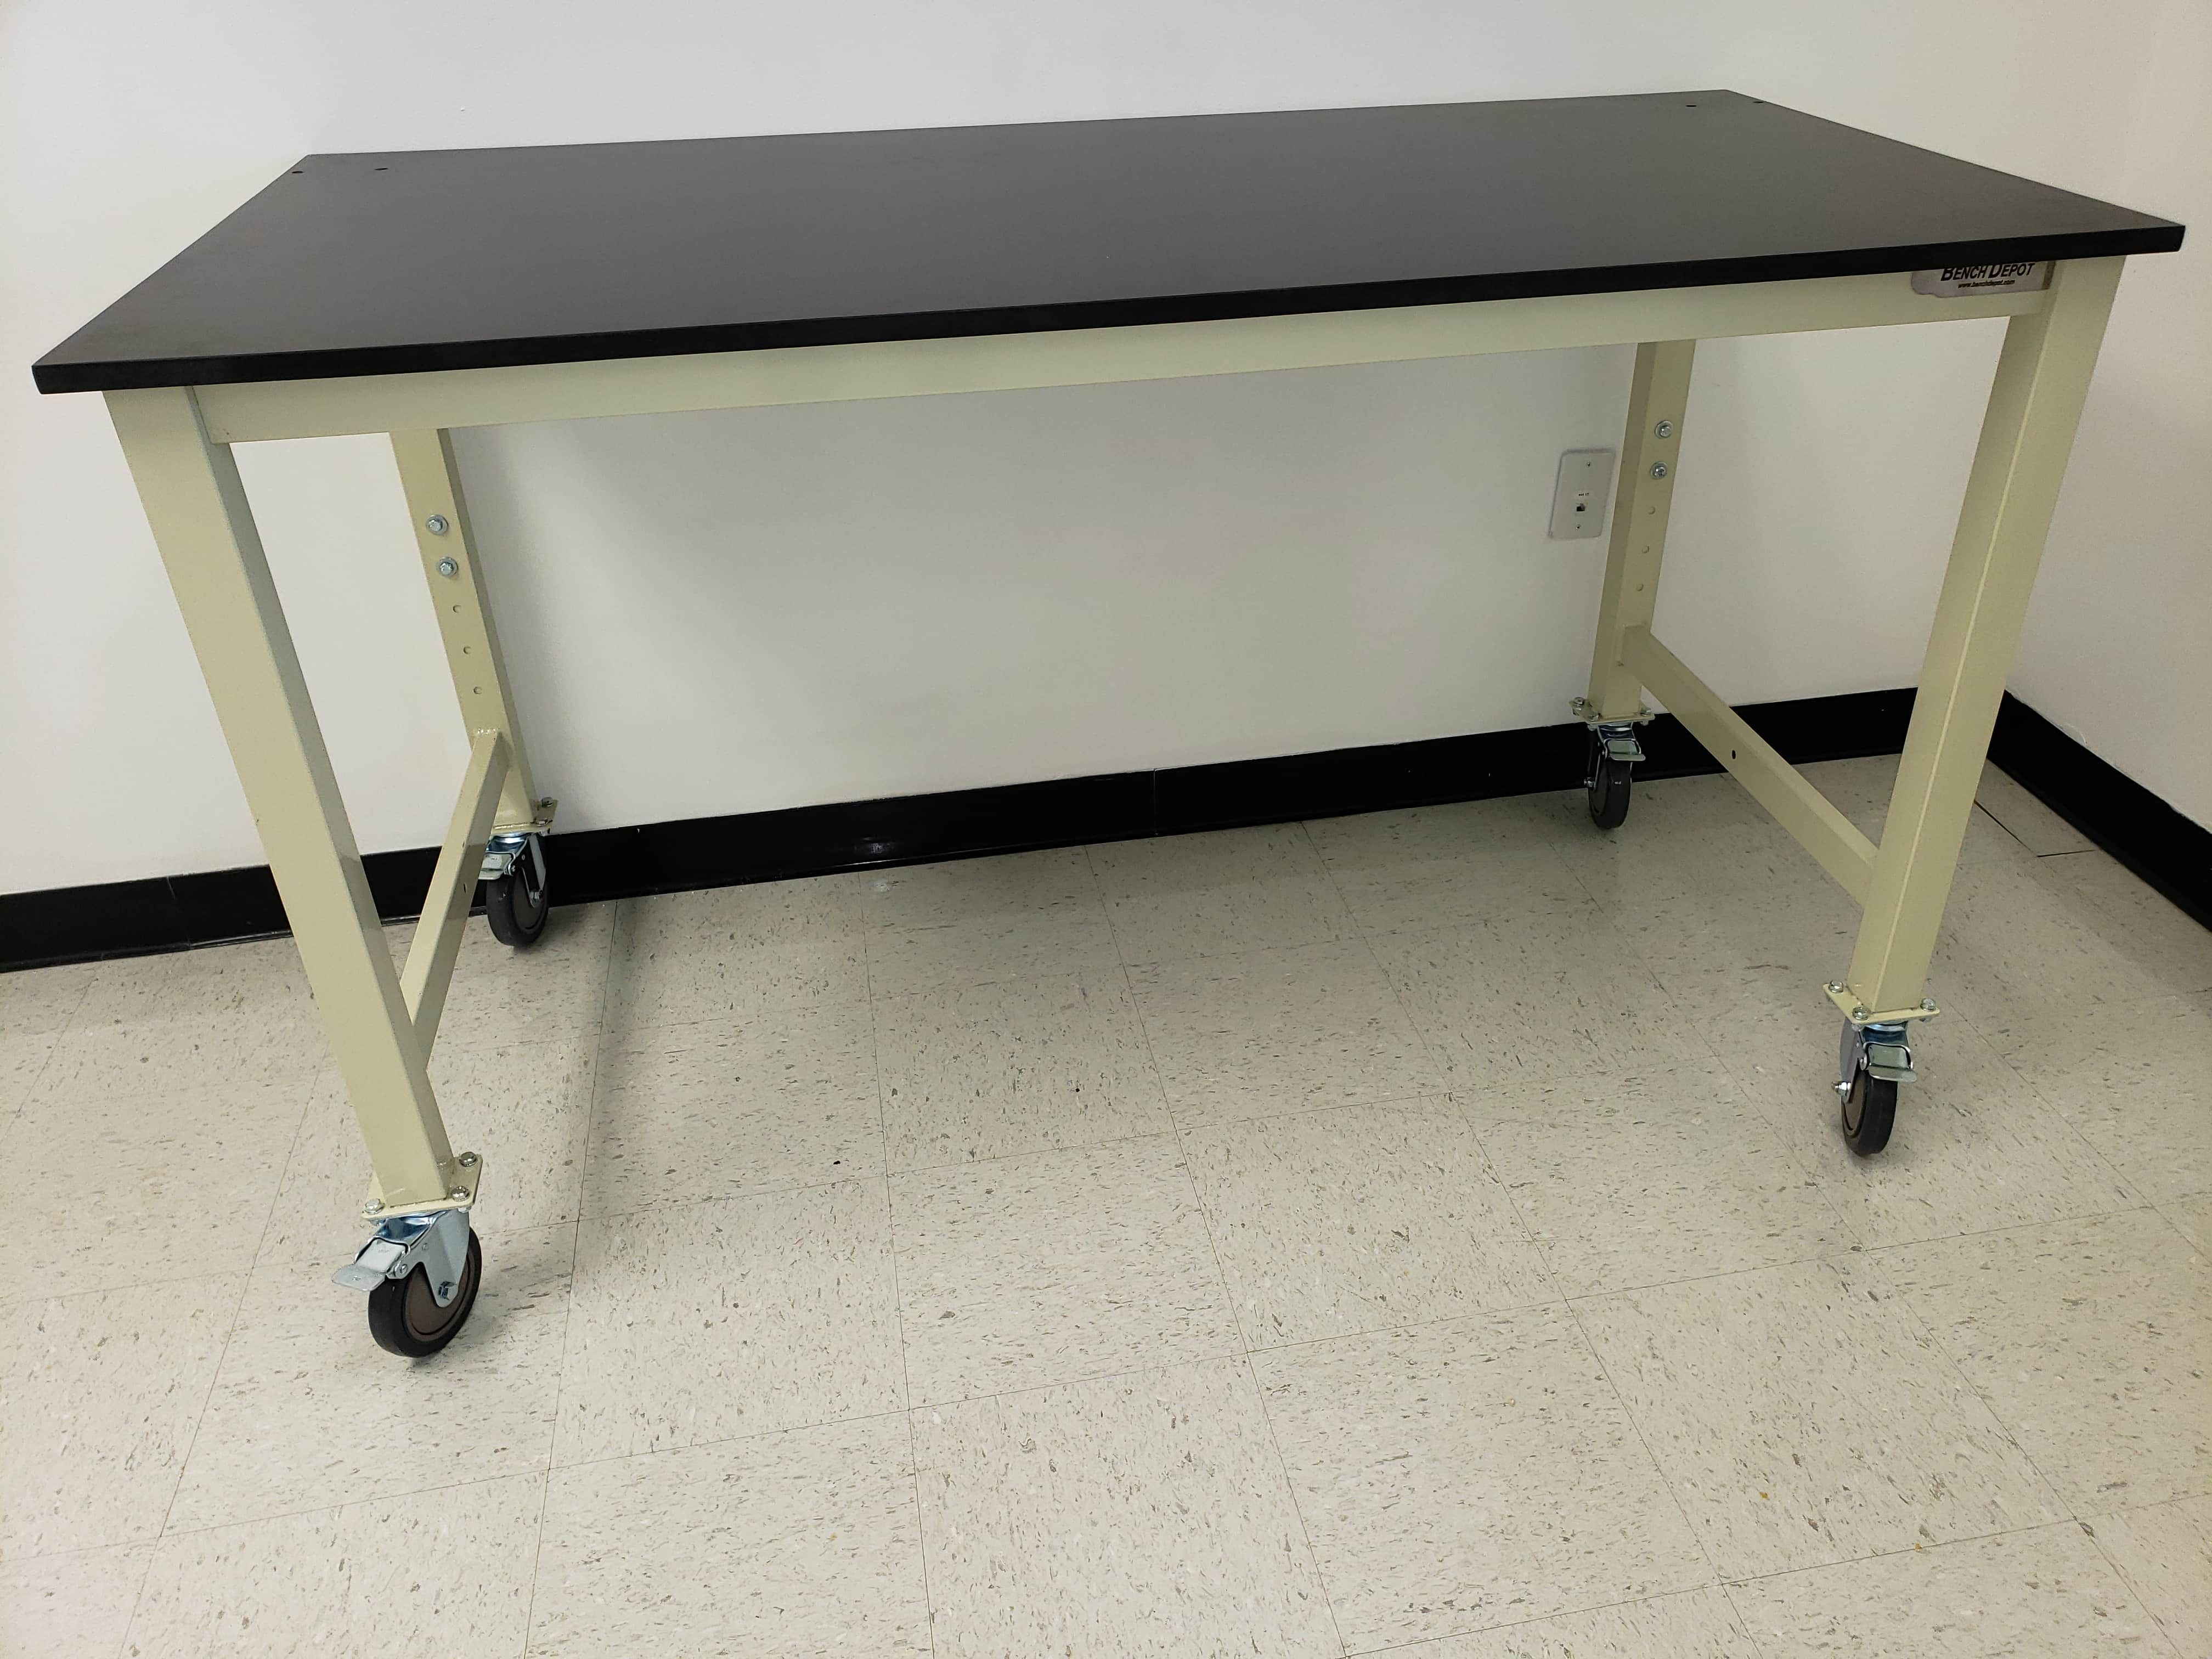 5 foot Lab table (60" long x 30"deep)- adjustable height (30"-36") with phenolic resin countertop (NEW)